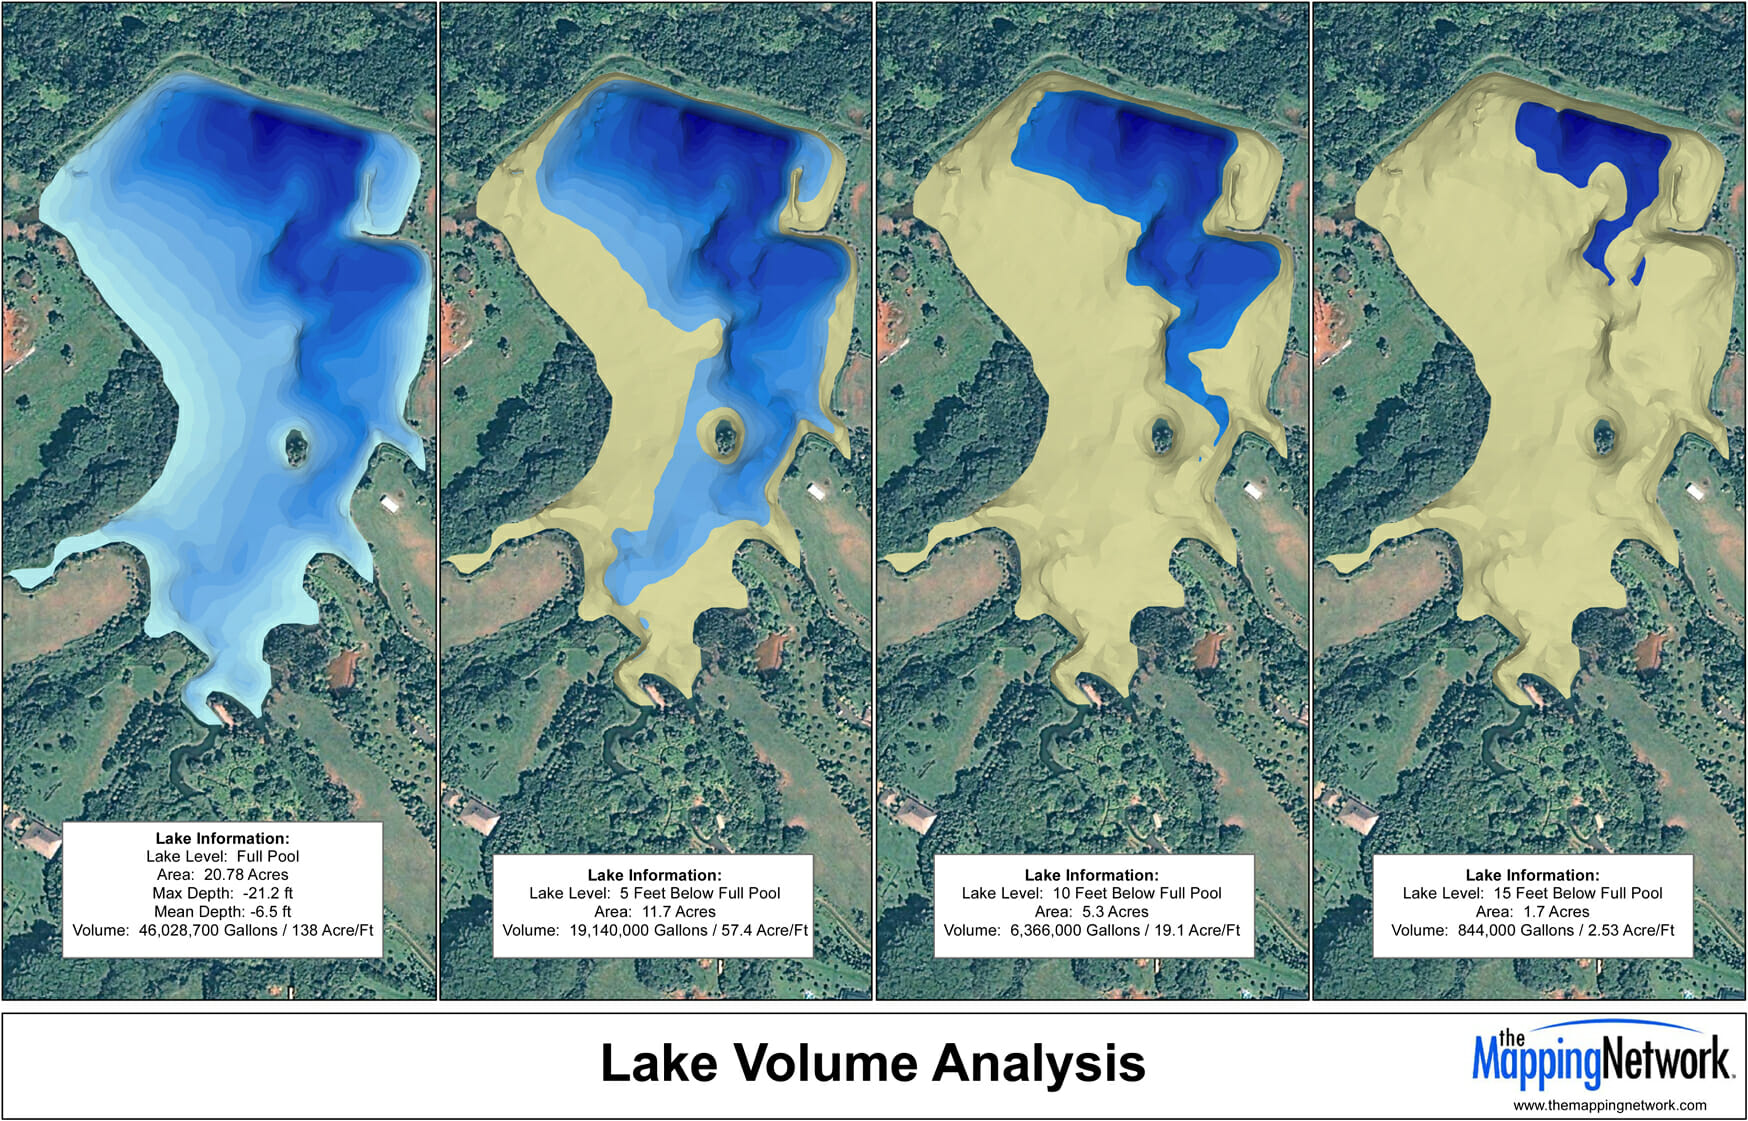 The Mapping Network offers a highly accurate "Volume Analysis" option for lakes.